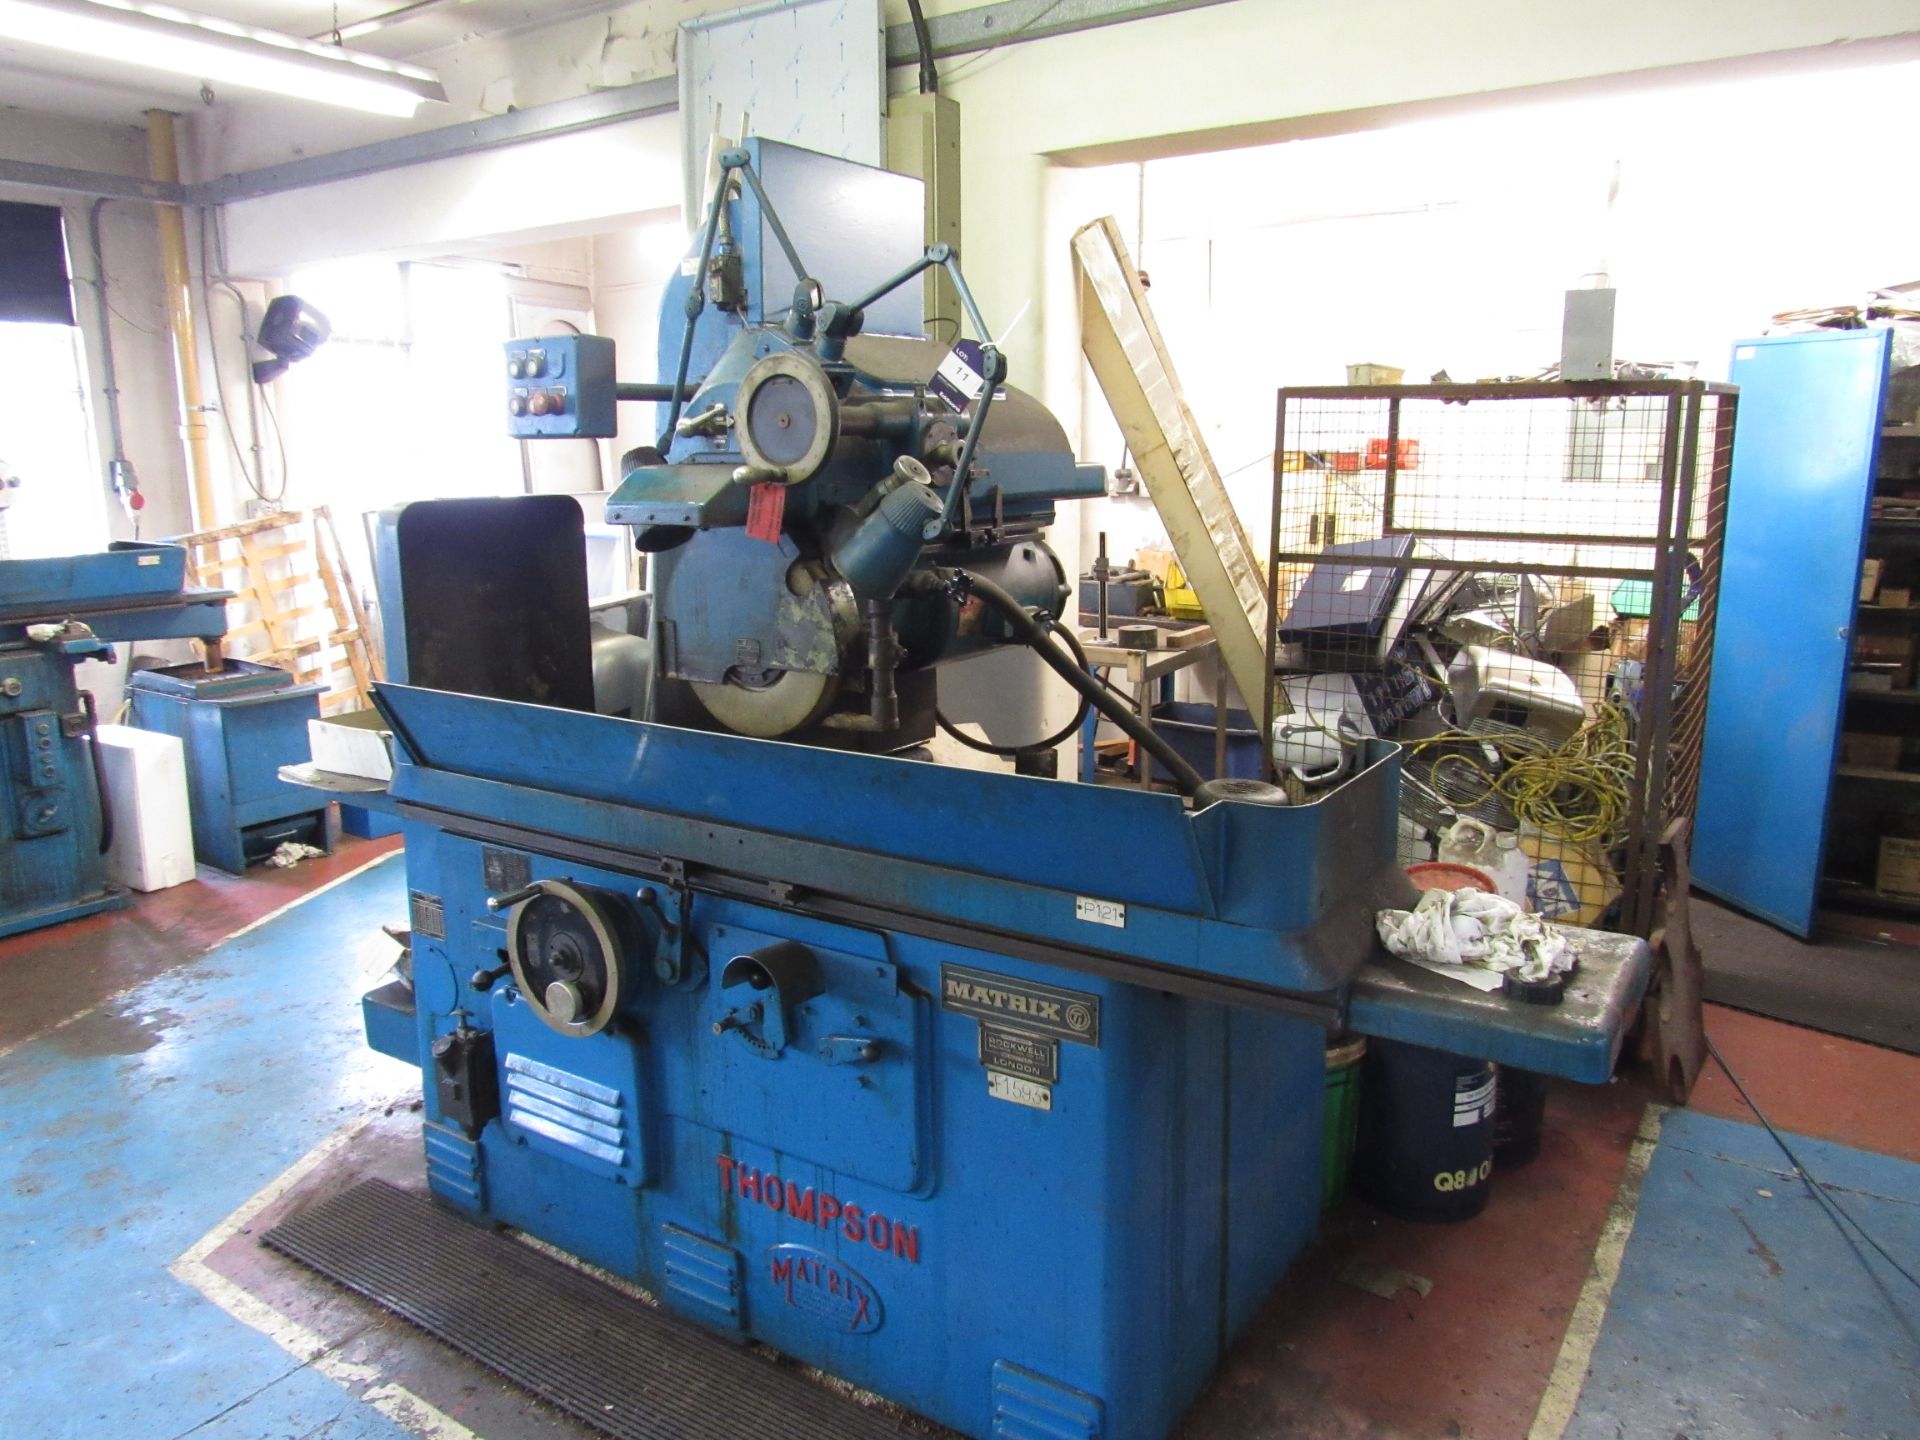 Thompson Matrix Horizontal surface grinder Serial Number 17746A / 35 MAC 4547, with Magnetic Chuck - Image 2 of 5